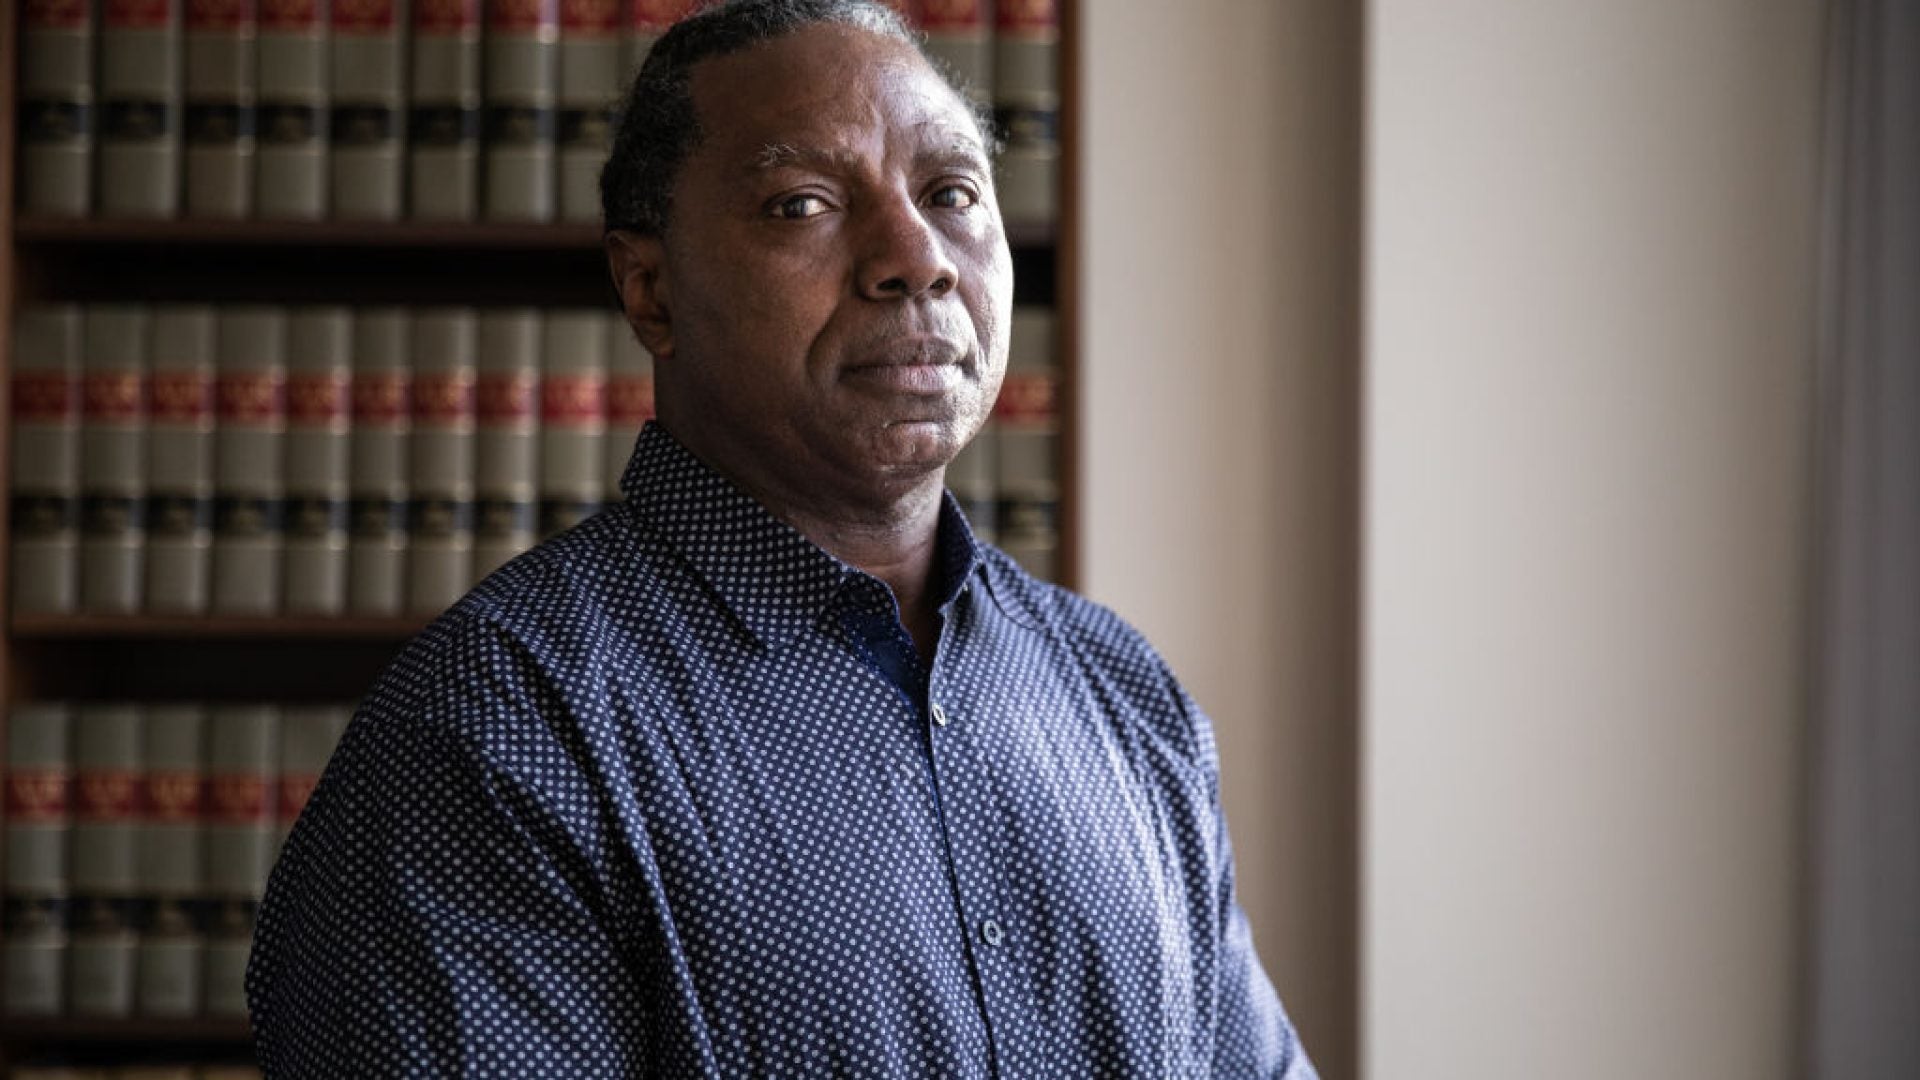 New York To Pay $5.5M To Black Man Who Spent 16 Years In Jail For A Rape He Didn't Commit